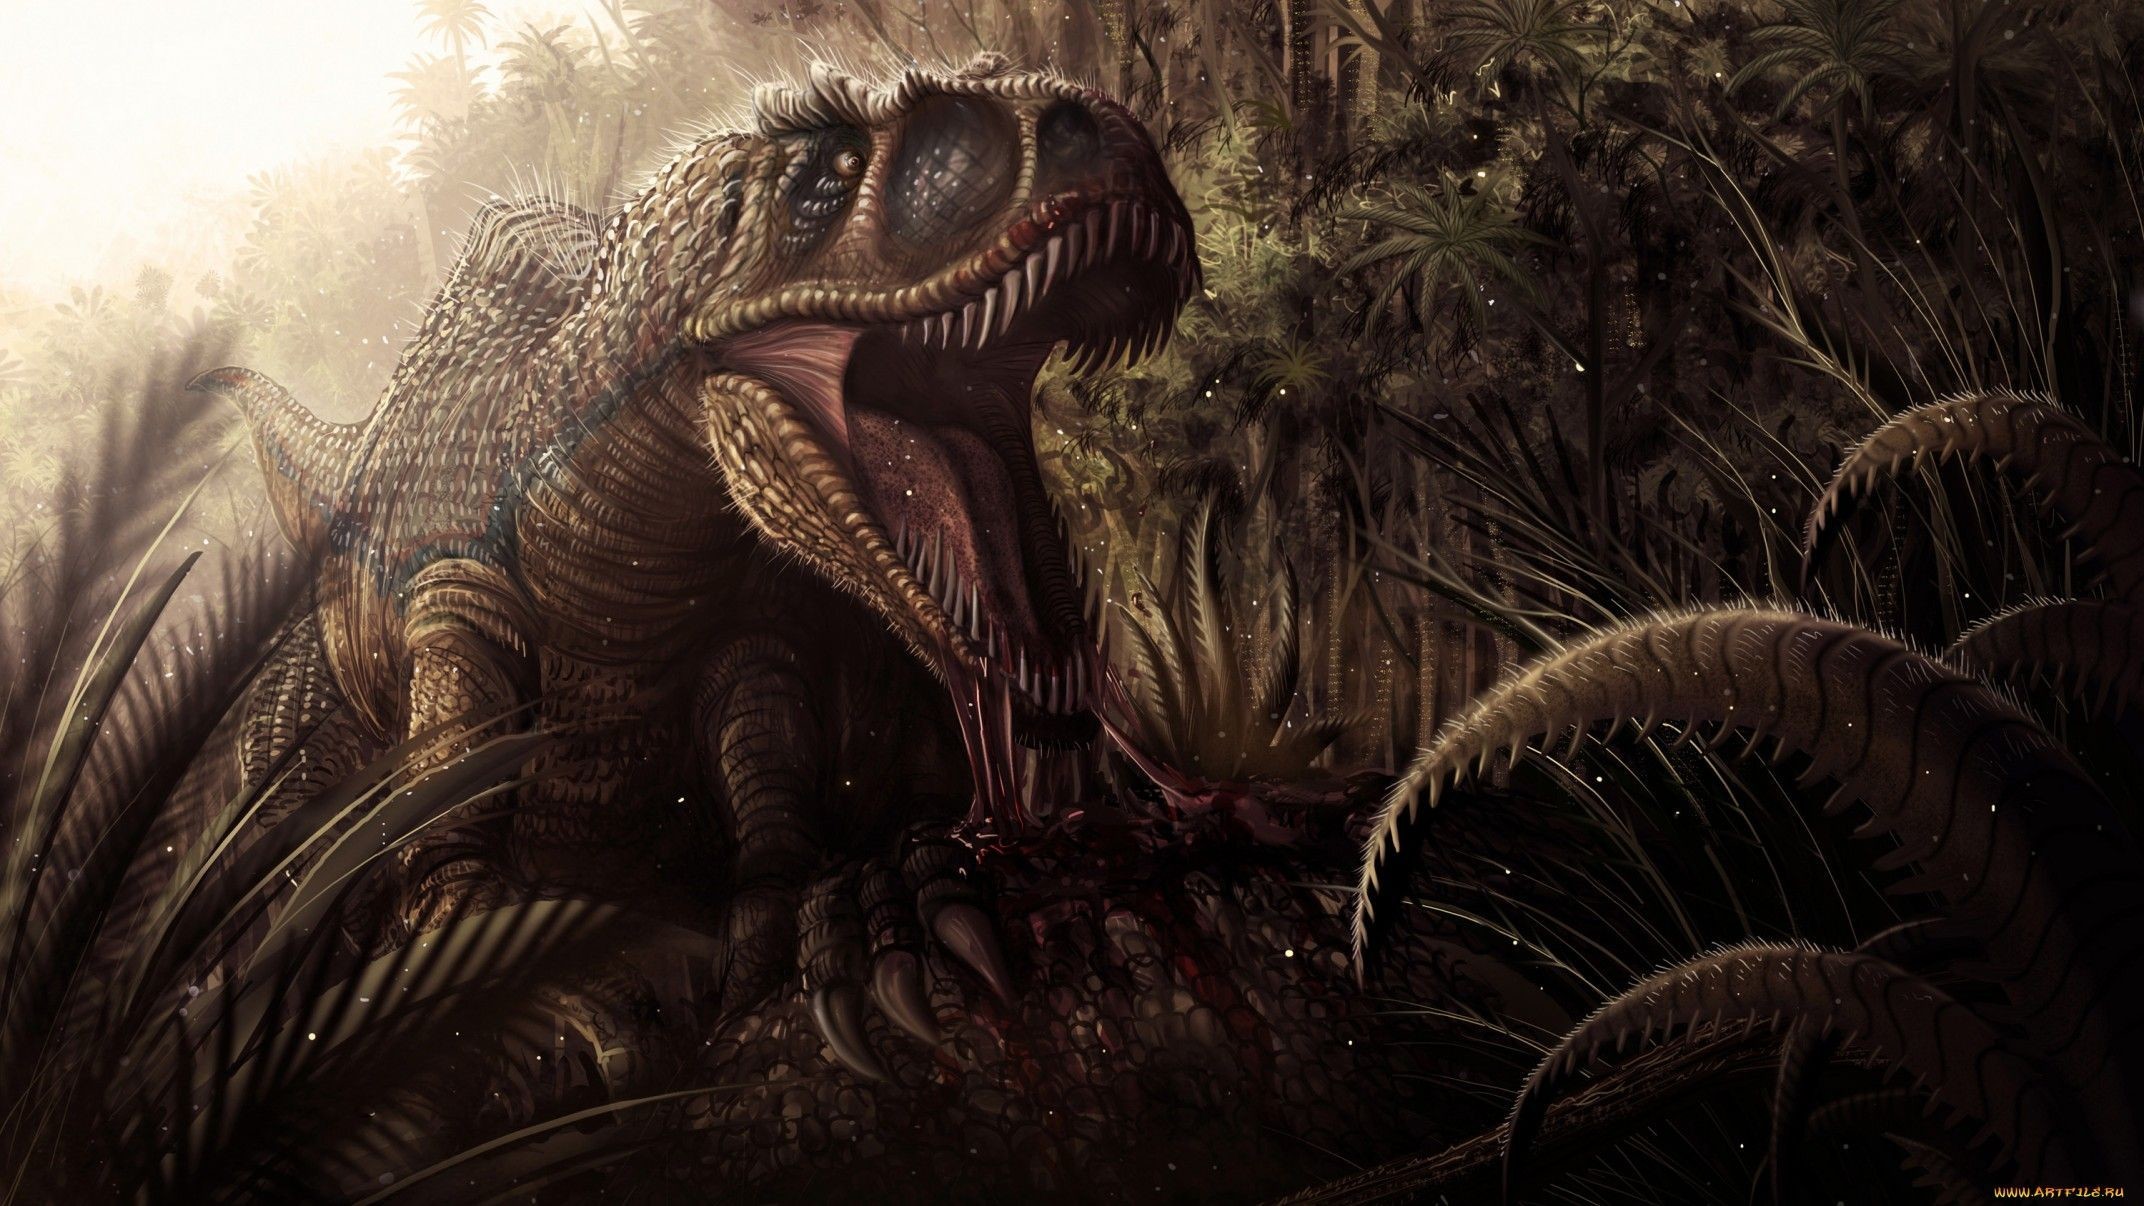 2144x1206 These Ferocious Dinosaur Wallpapers Will Rampage on Your Desktop